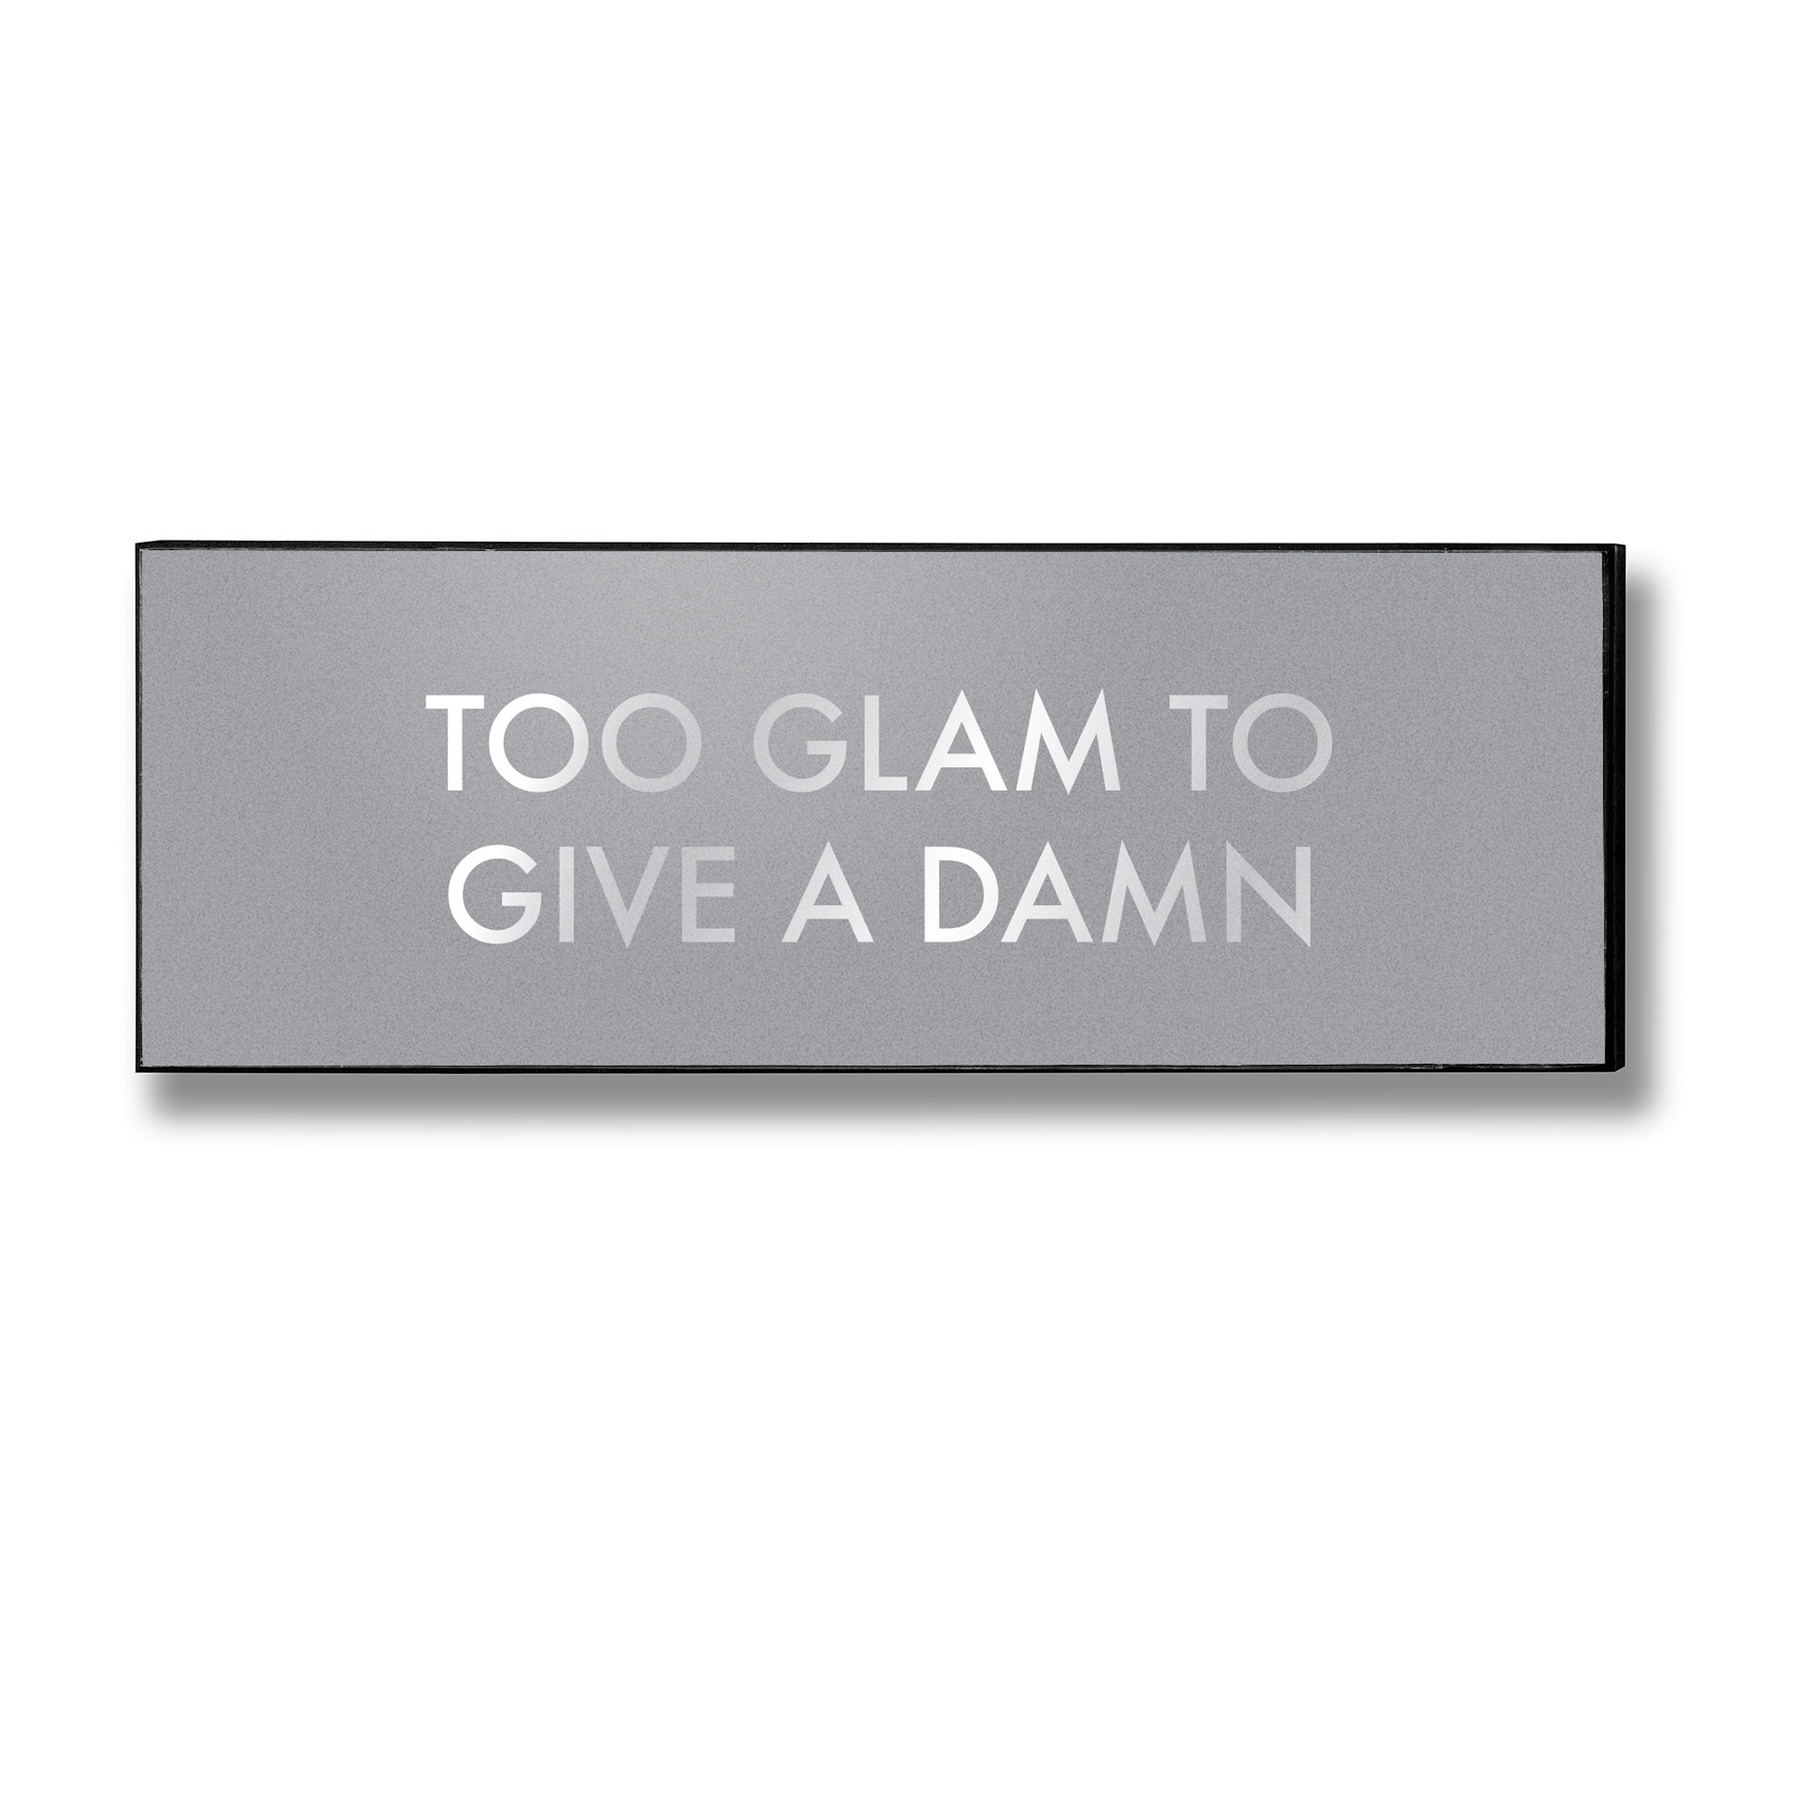 Too Glam To Give a Damn Silver Foil Plaque - Image 1